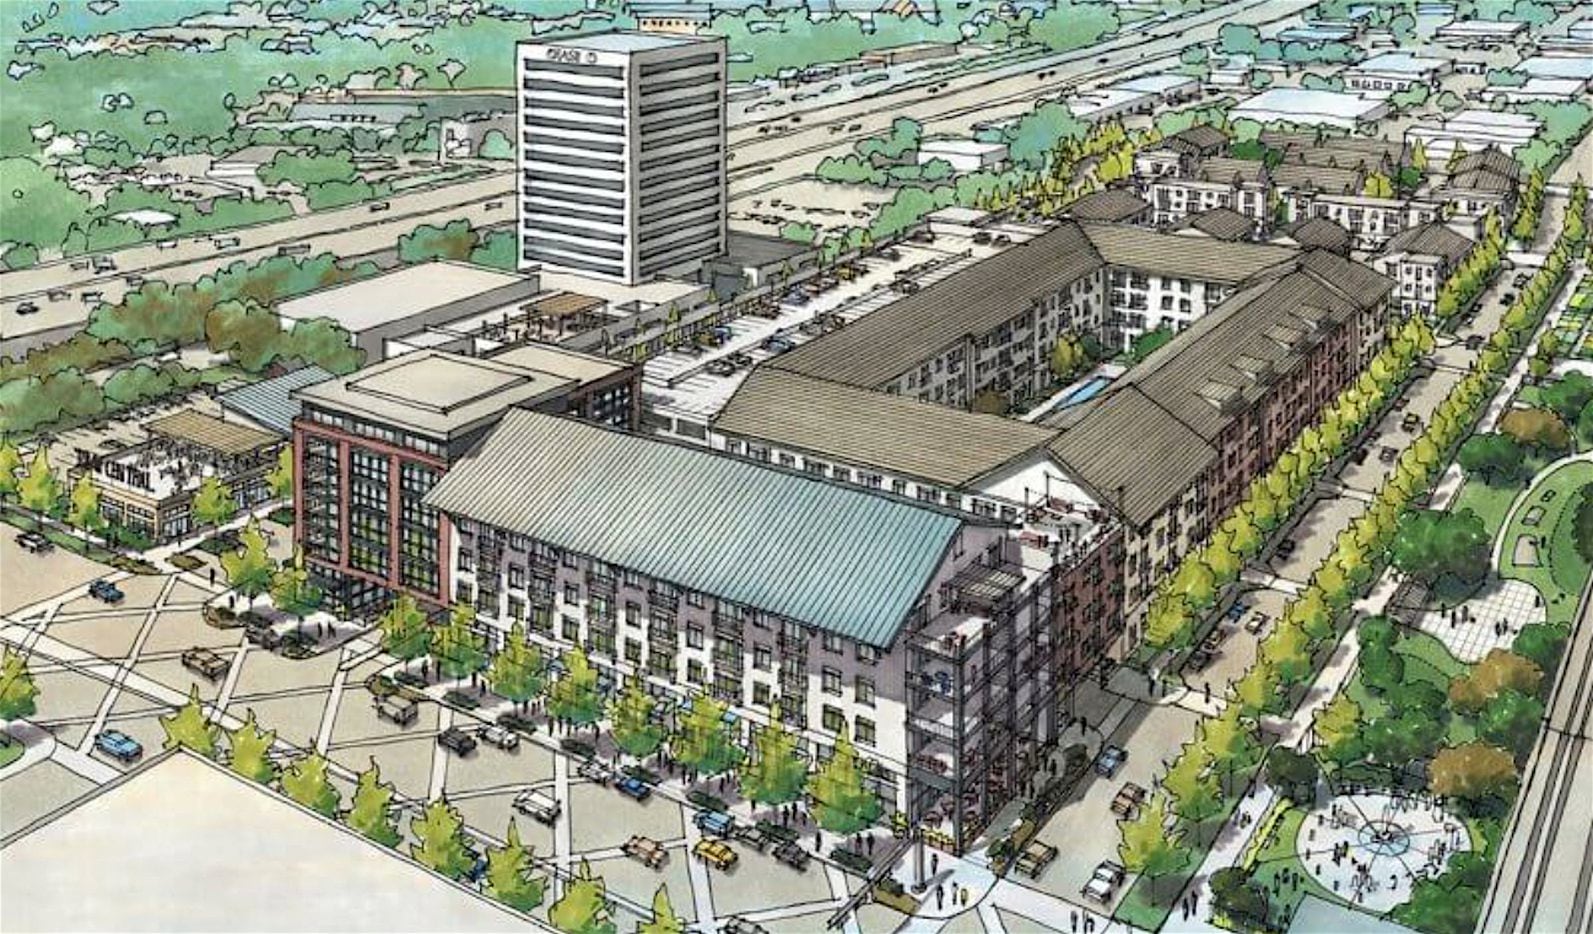 The Town Central project planned on Richardson's Main Street includes apartments, retail space and townhouses.